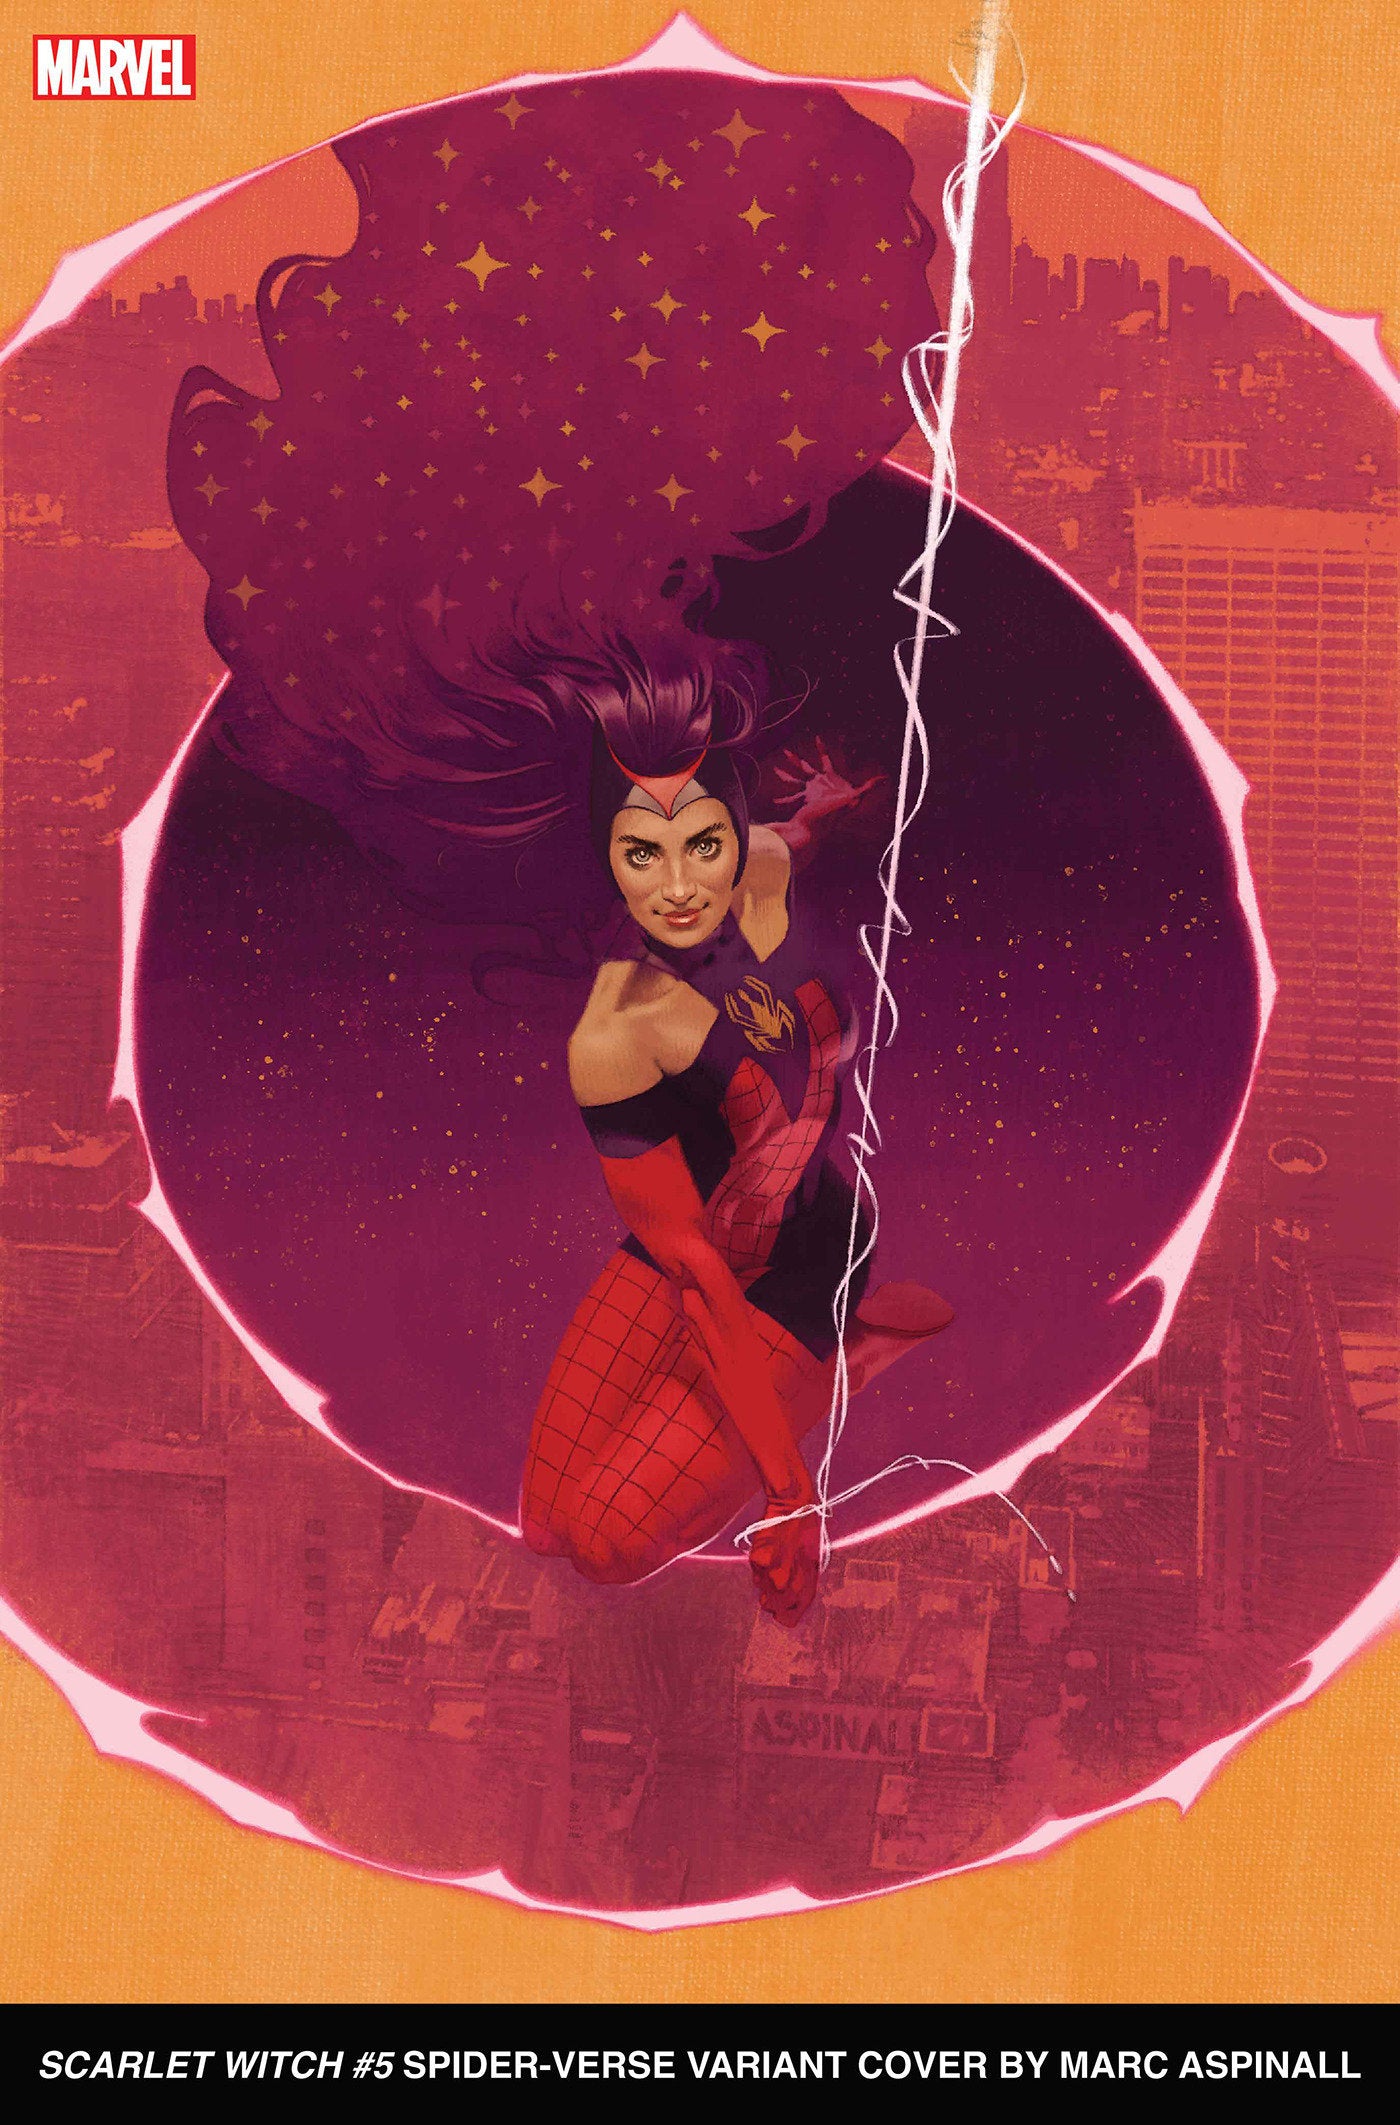 Scarlet Witch 5 Marc Aspinall Spider-Verse Variant